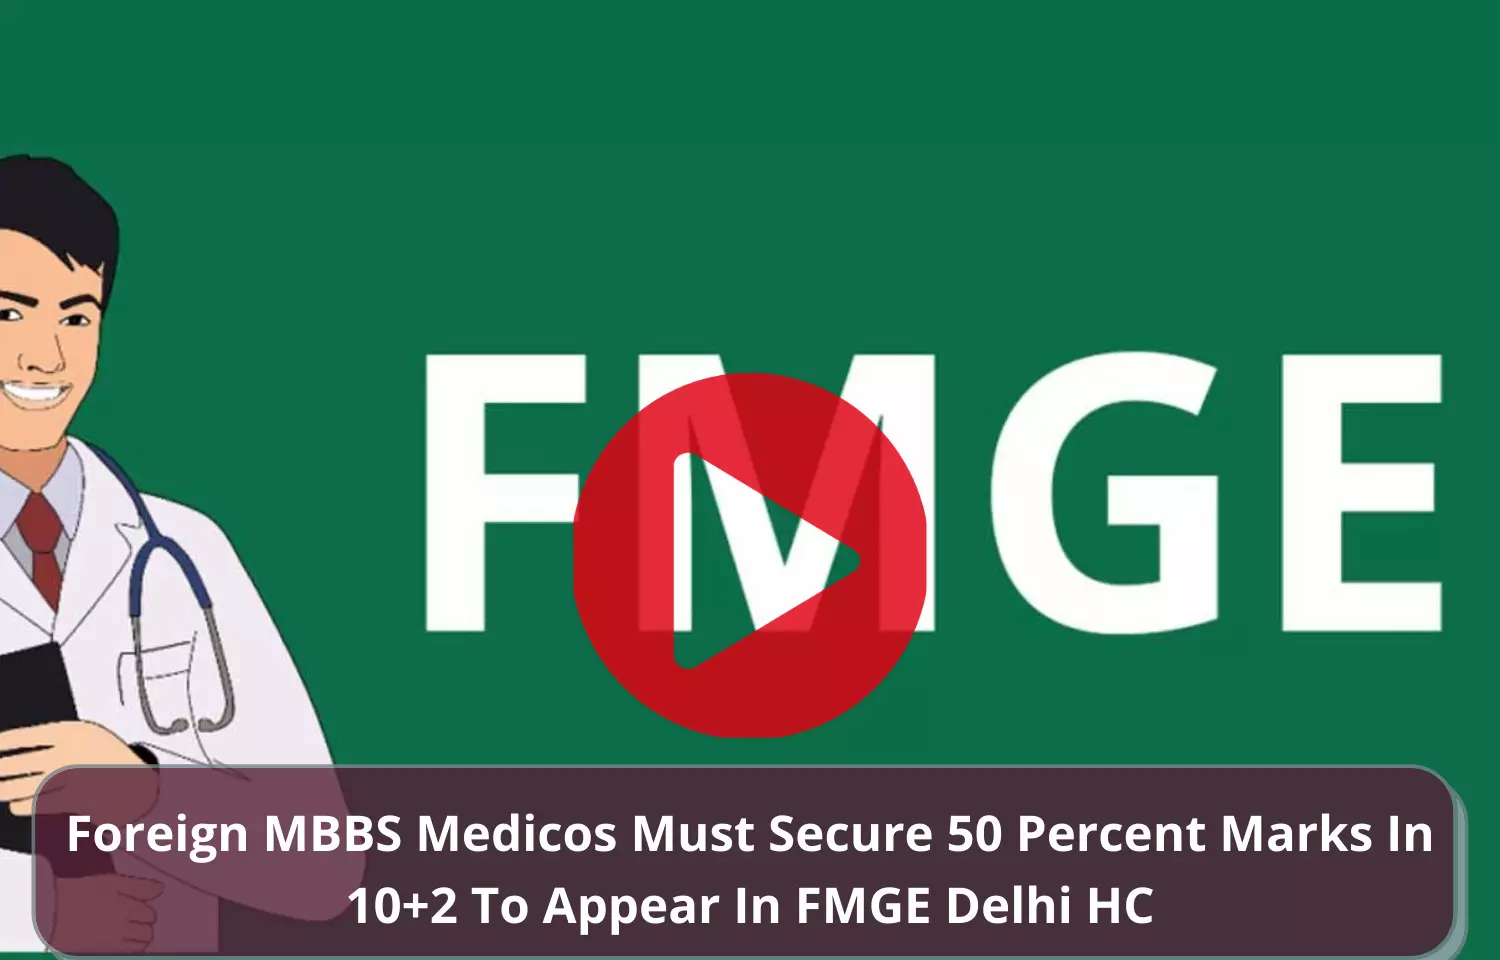 Foreign MBBS medicos must secure 50 percent marks in 10+2 to appear in FMGE: Delhi High Court